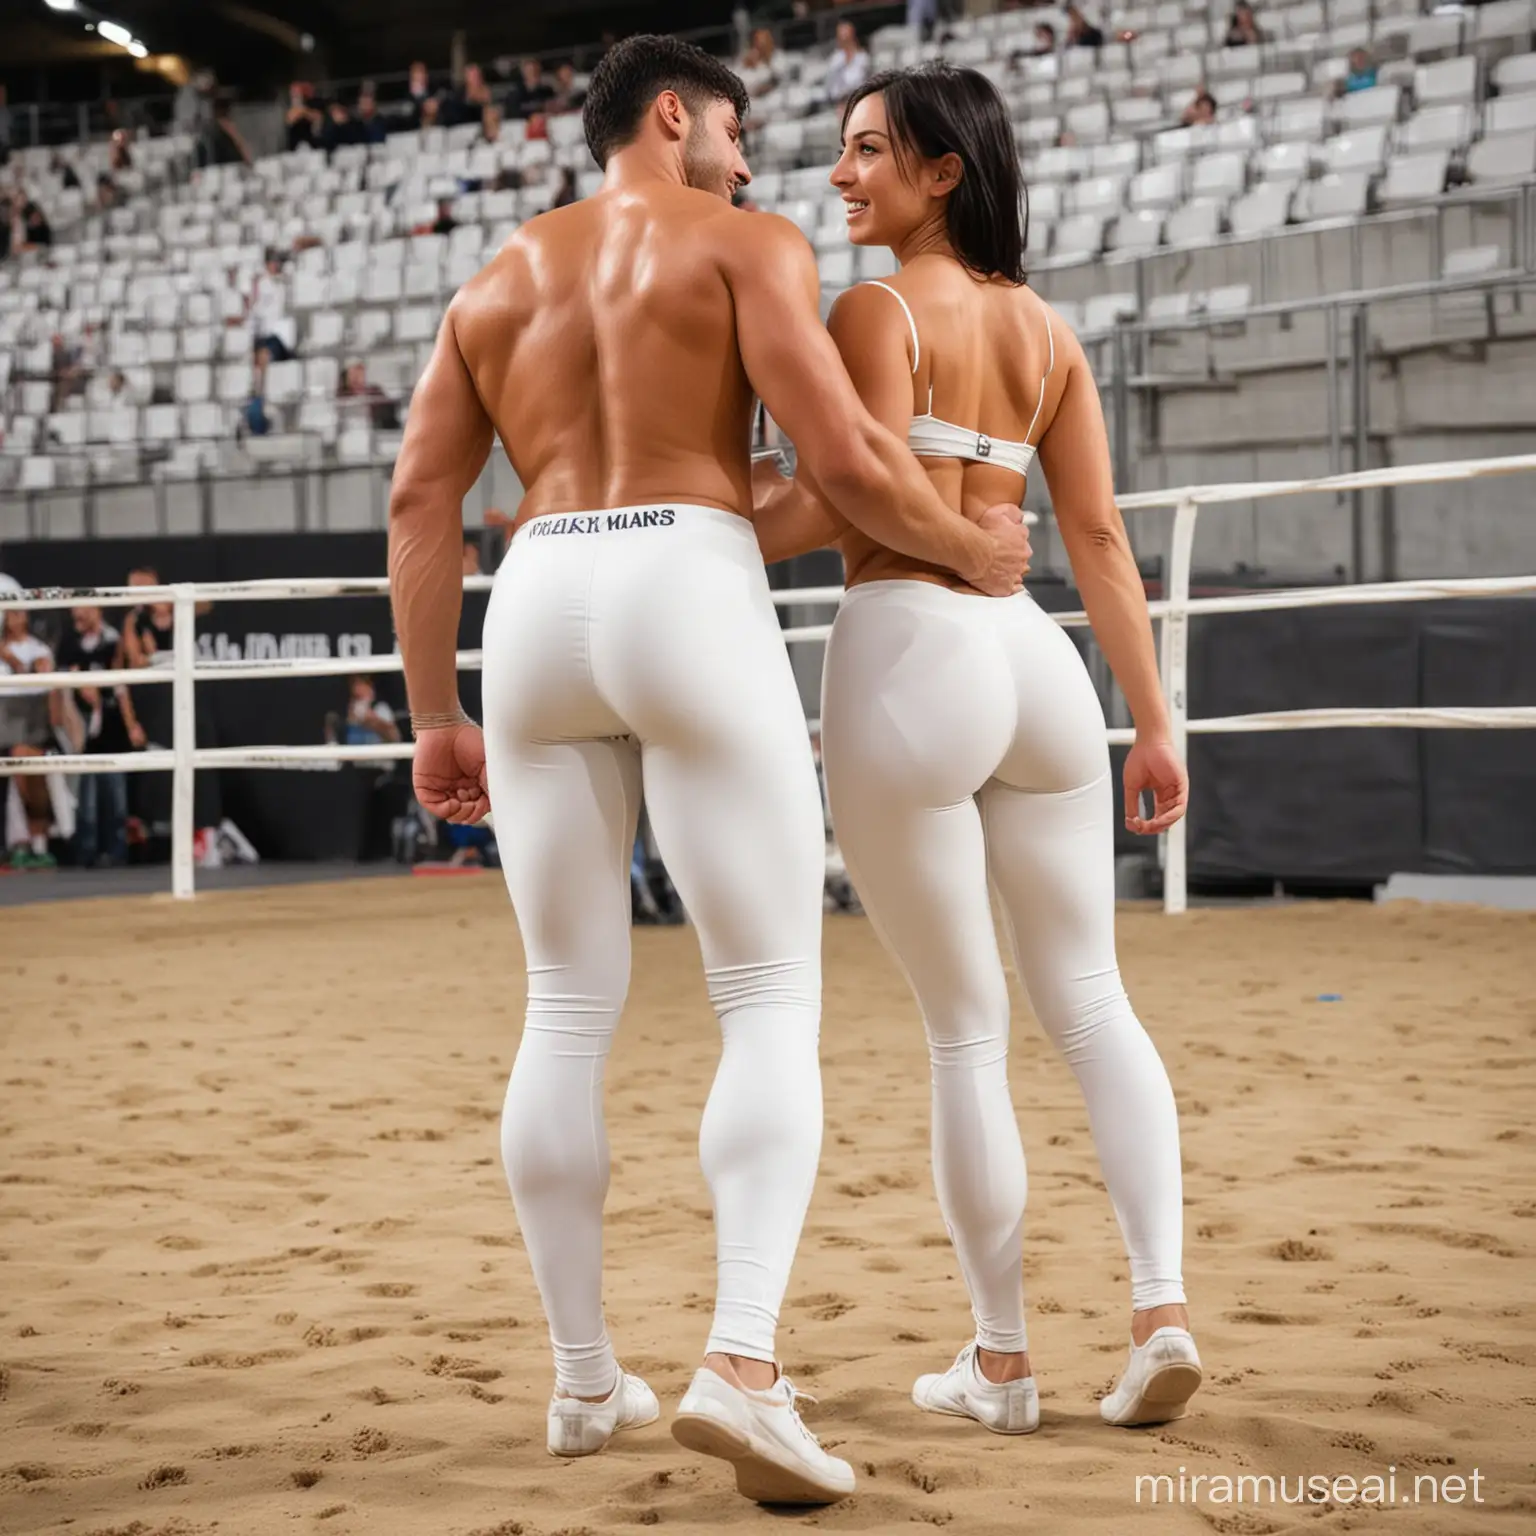  handsome fit shirtless 27 year old Italian wrestler, with tan skin and short black hair,clean shaved,  with well defined buttocks, wearing long white spandex leggings; flirting with woman (in casual outfit) during match, rear view